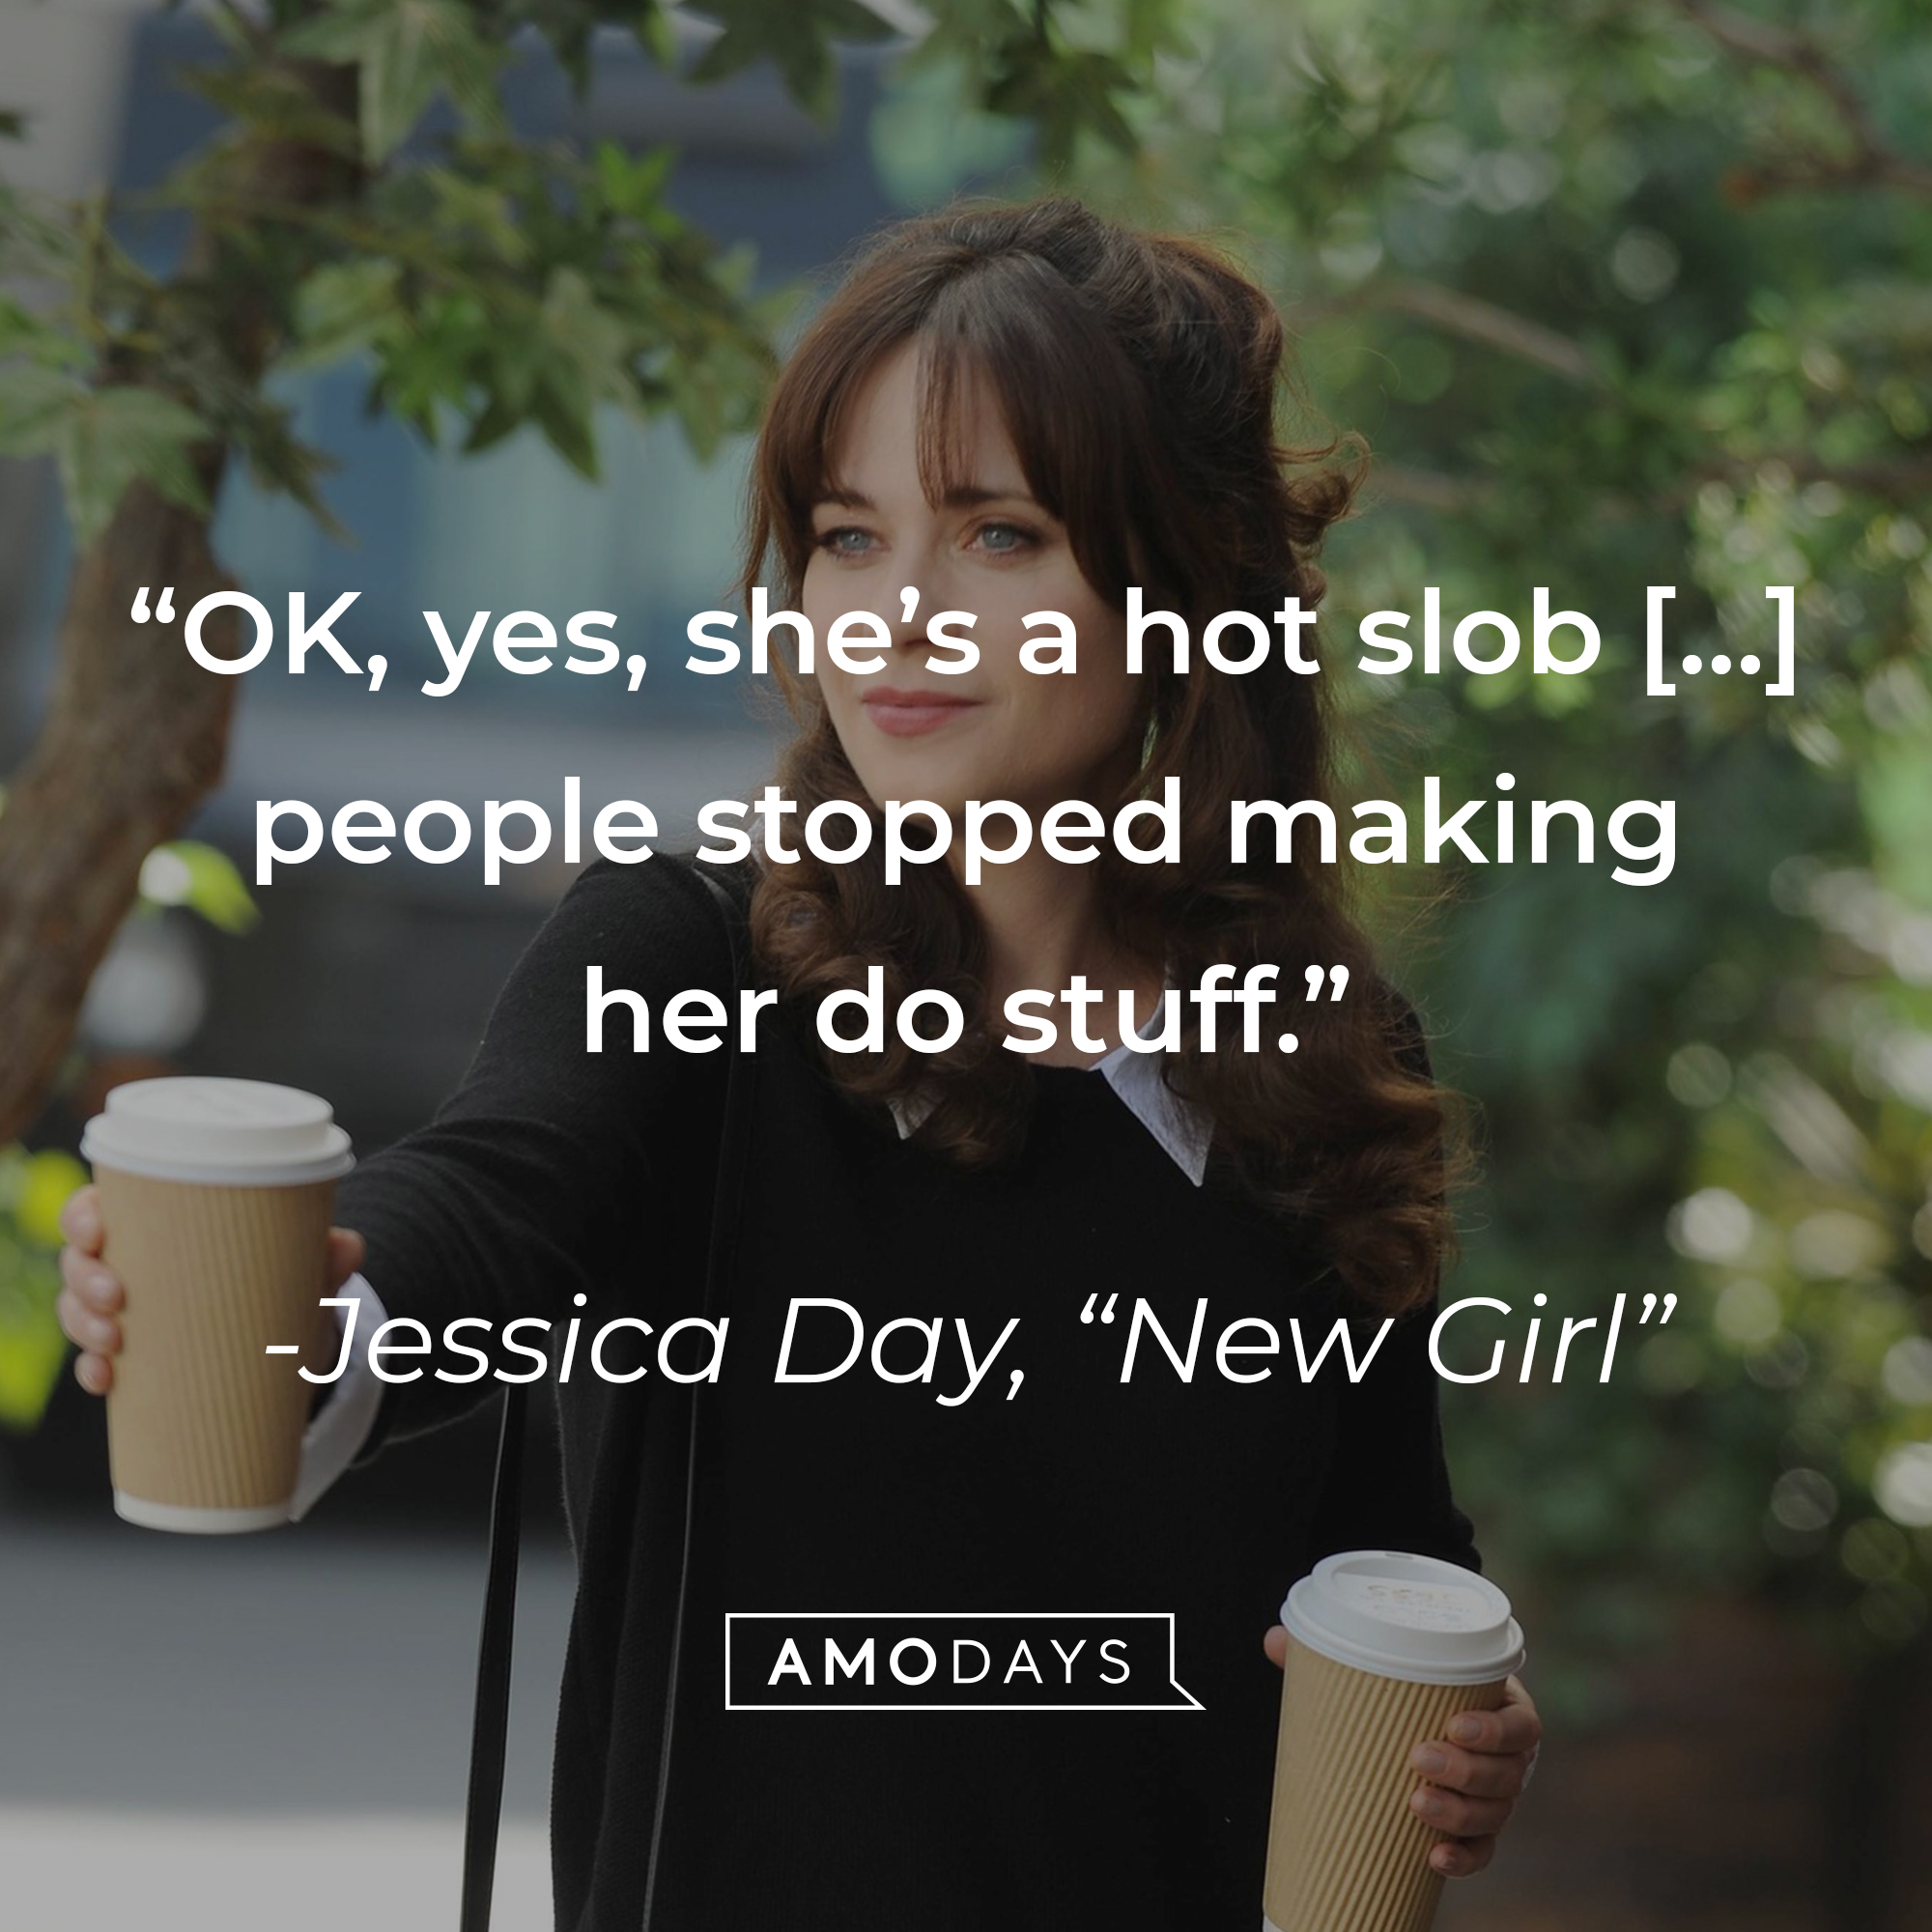 Jessica Day’s quote from “New Girl”: “OK, yes, she’s a hot slob […] people stopped making her do stuff.” | Source: facebook.com/OfficialNewGirl